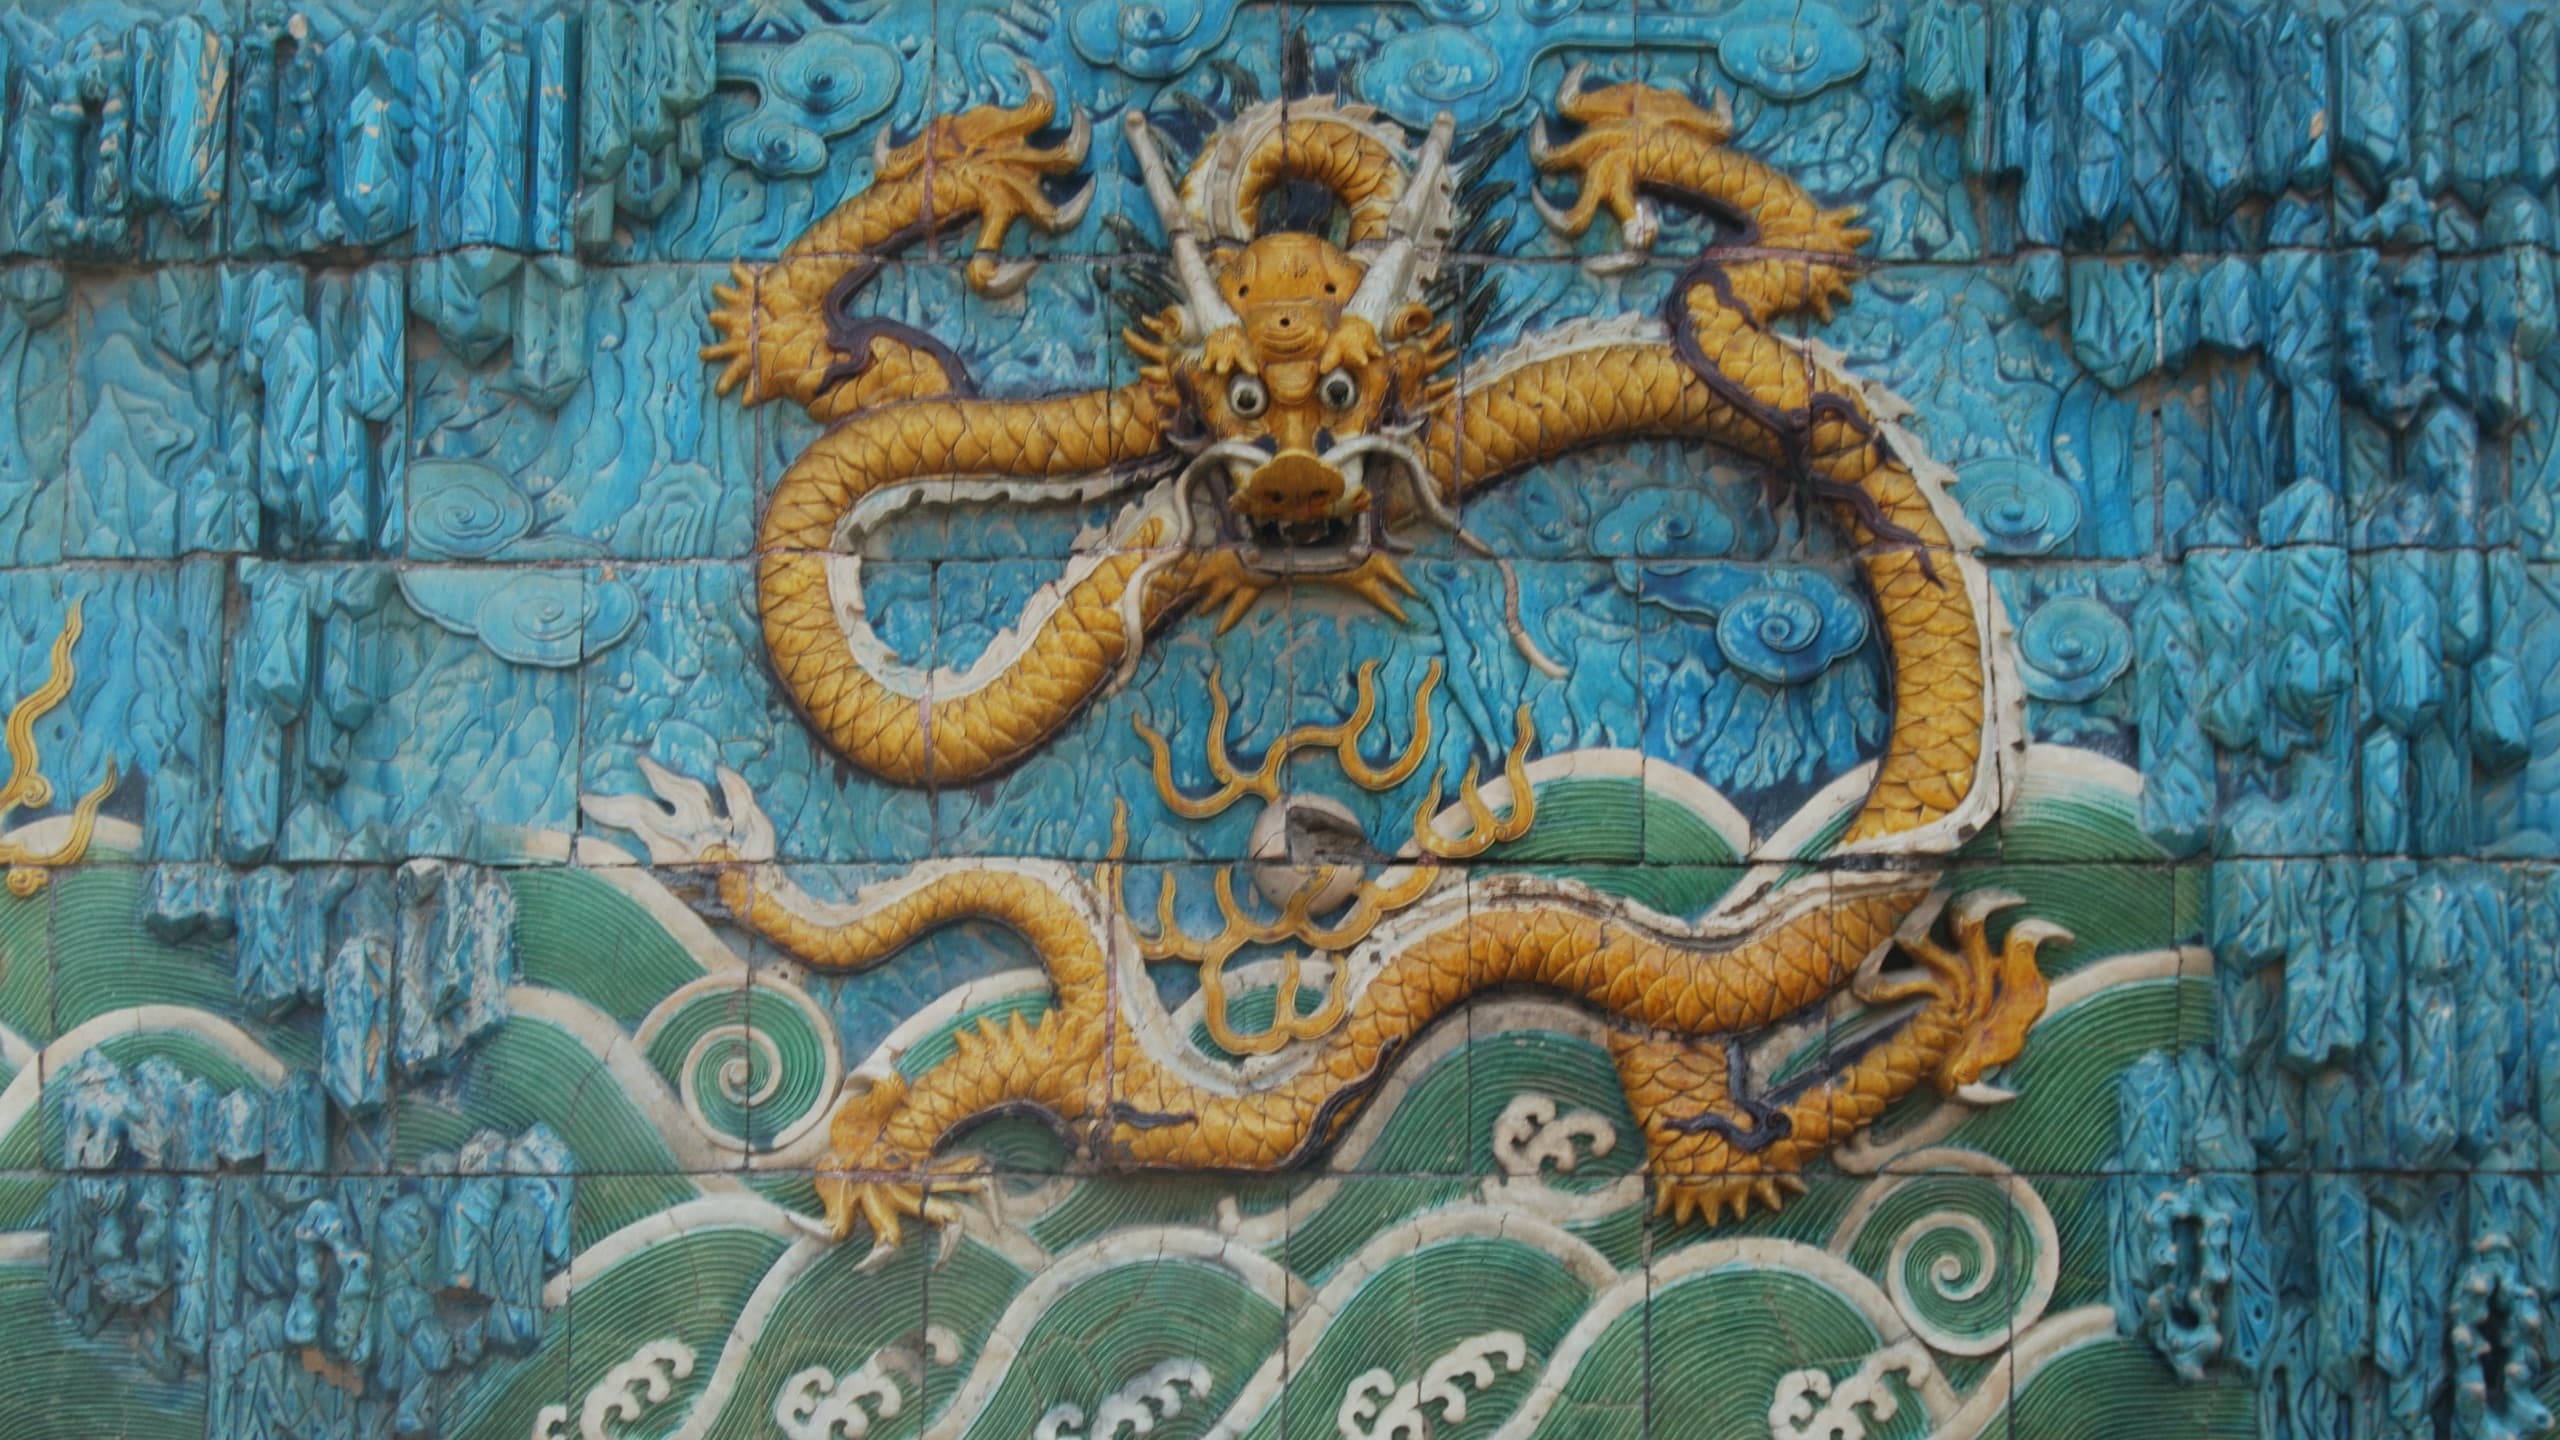 One of the dragons on the Nine Dragon Screen Wall of the Forbidden City in Beijing